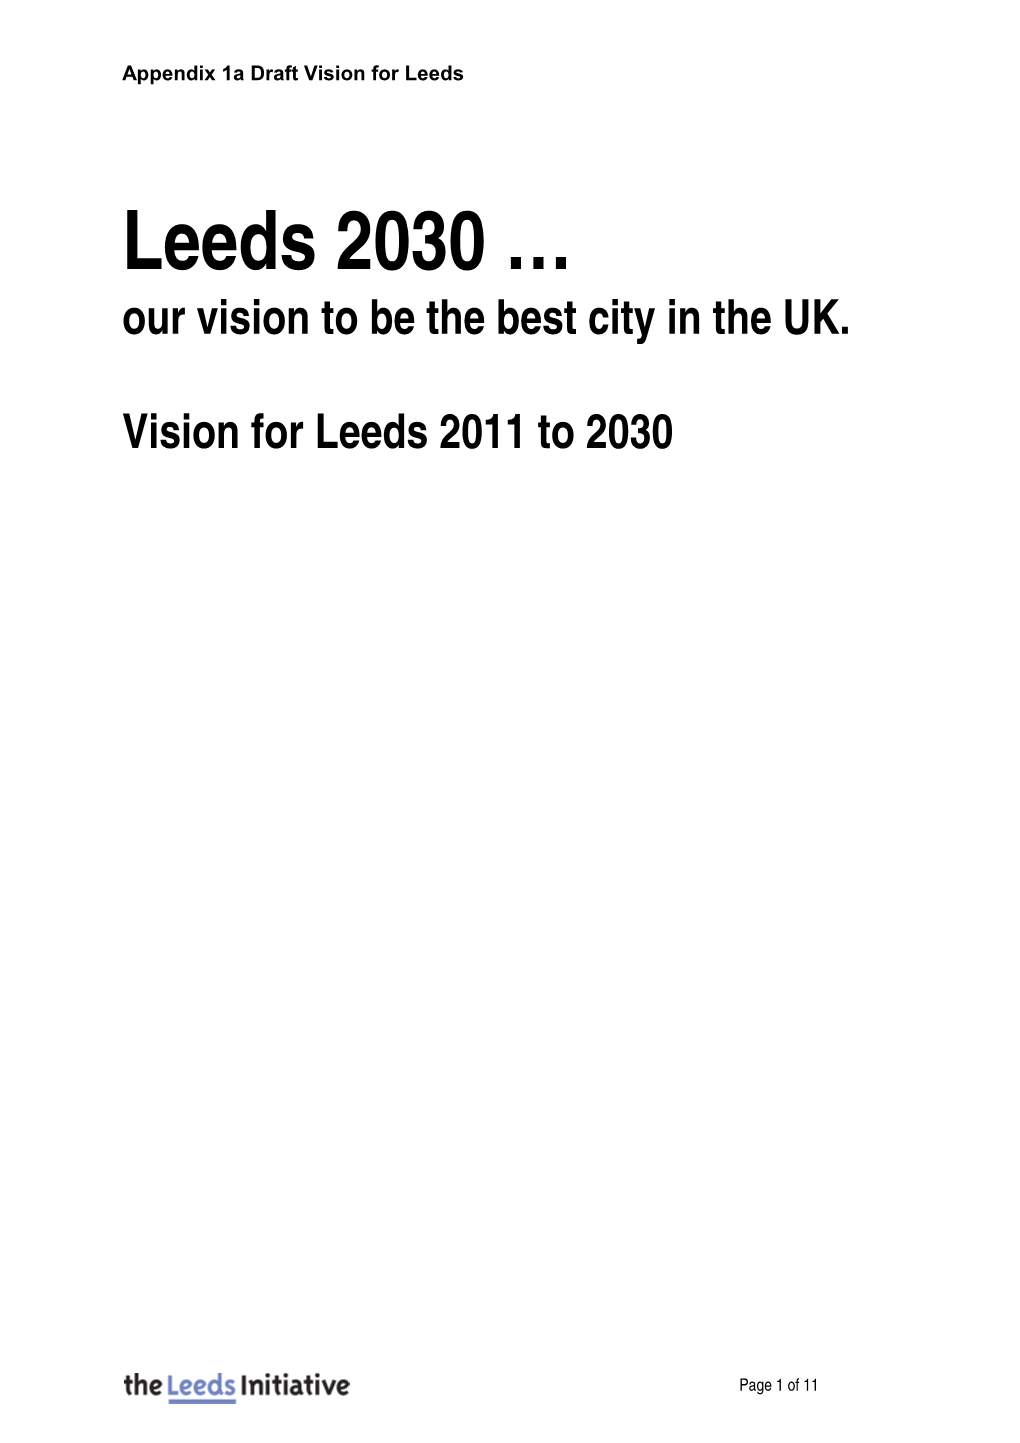 Our Vision to Be the Best City in the UK. Vision for Leeds 2011 to 2030